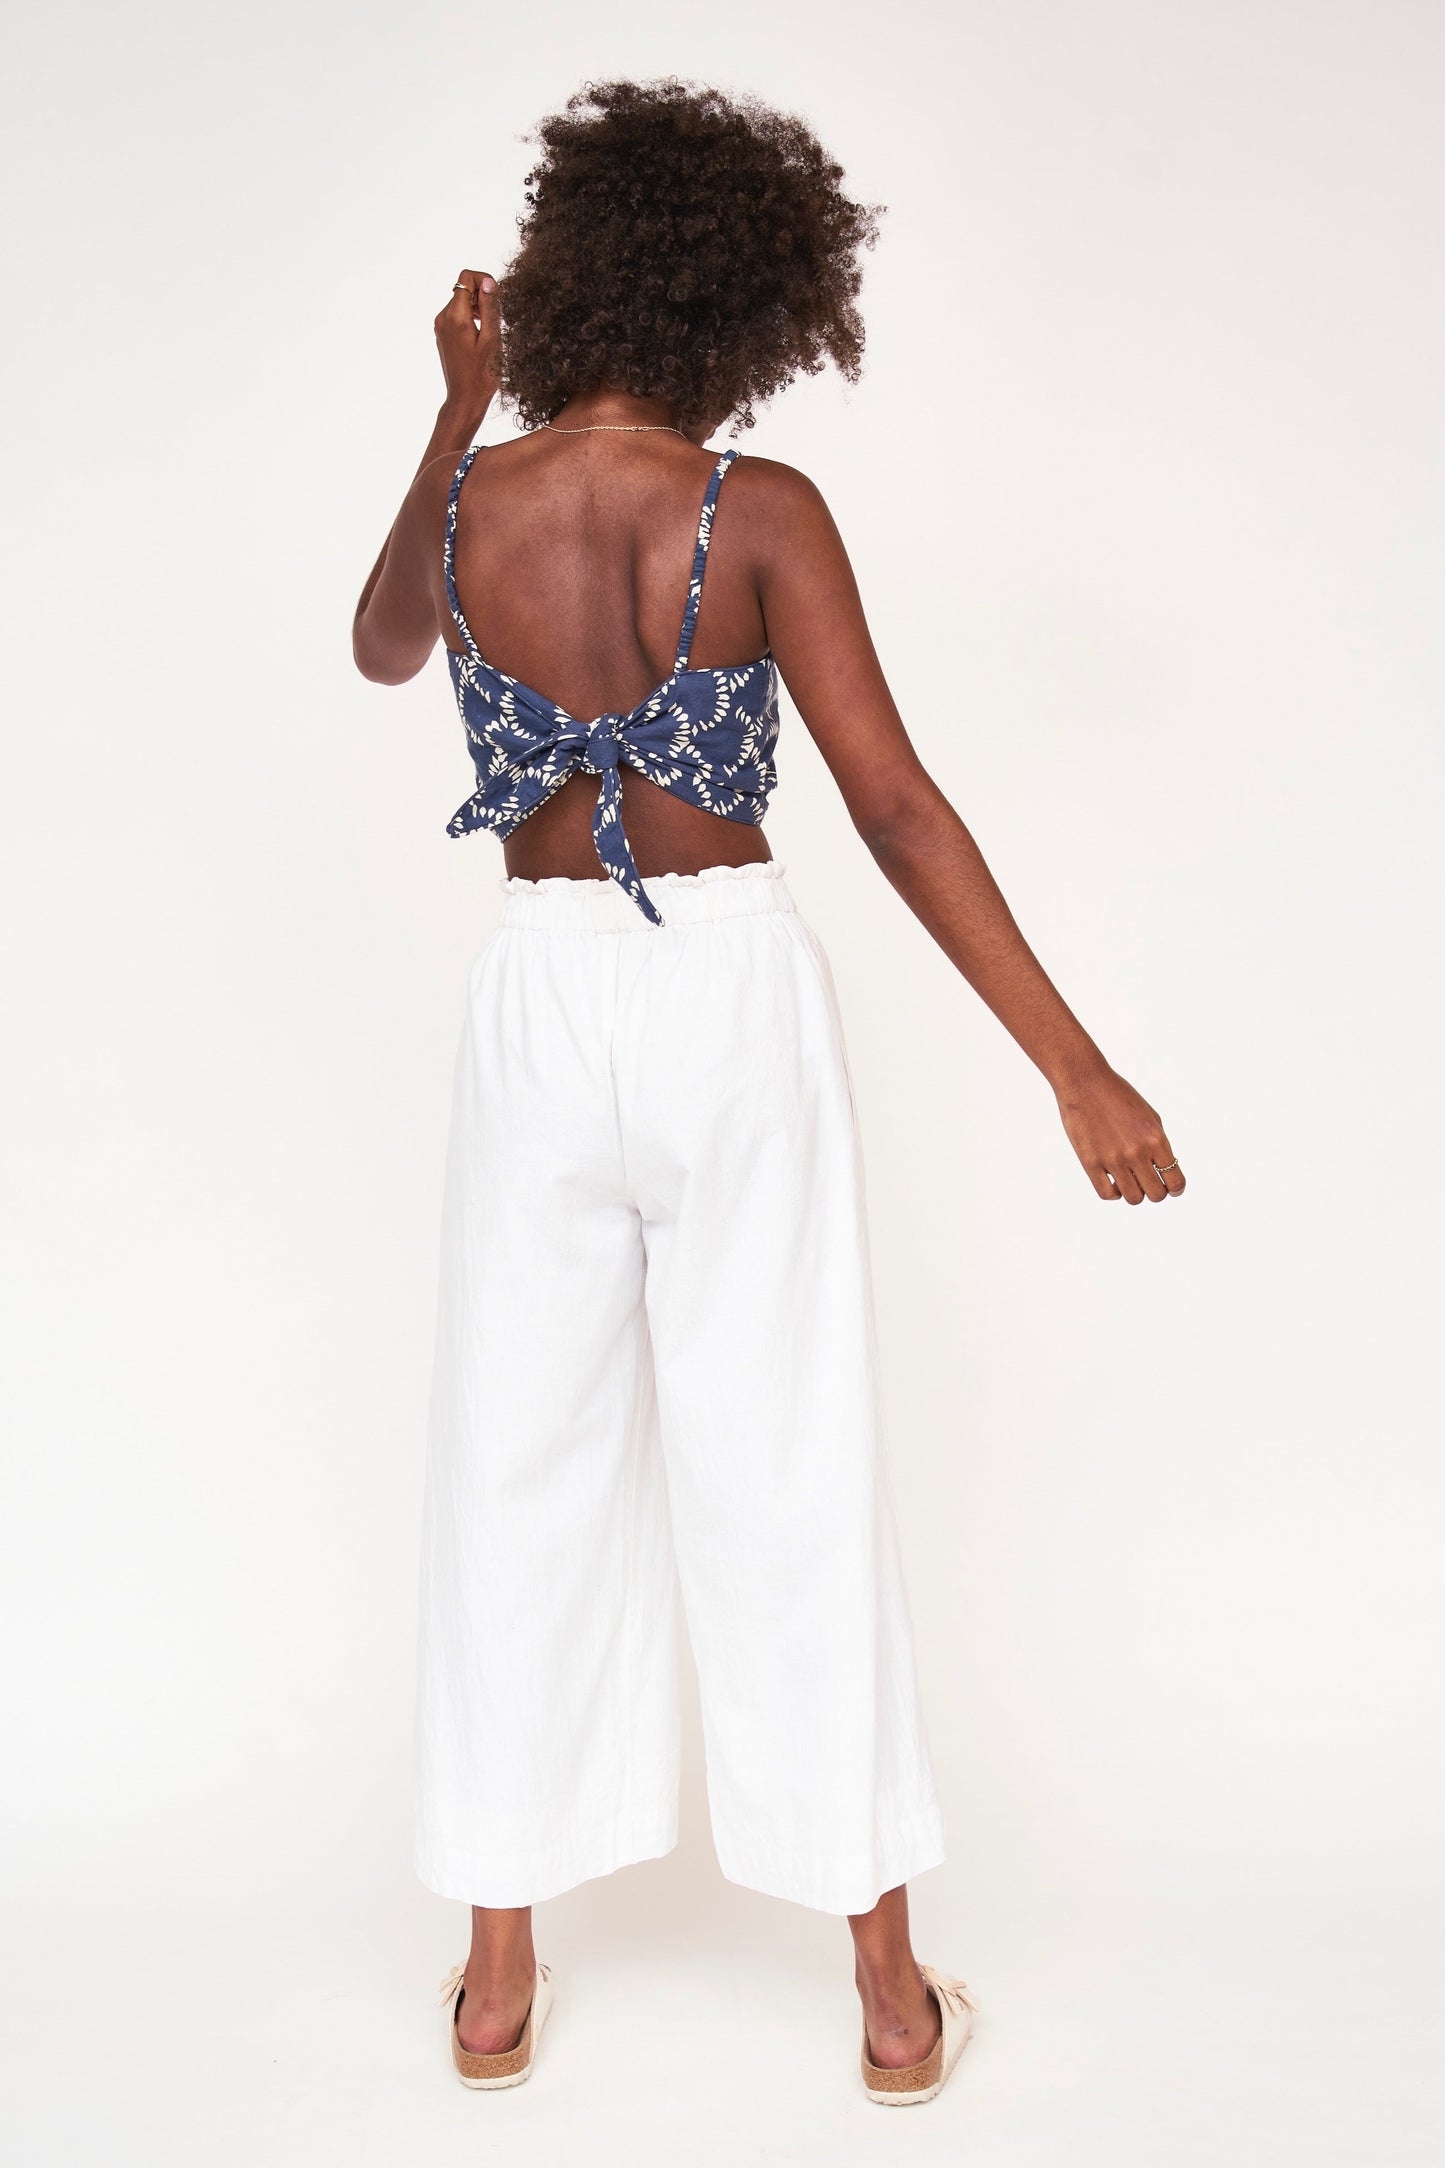 Consider this a bra top with a bit more coverage. The tie back and elastic straps allow for a perfect fit. Ethically made with 100% cotton in India.